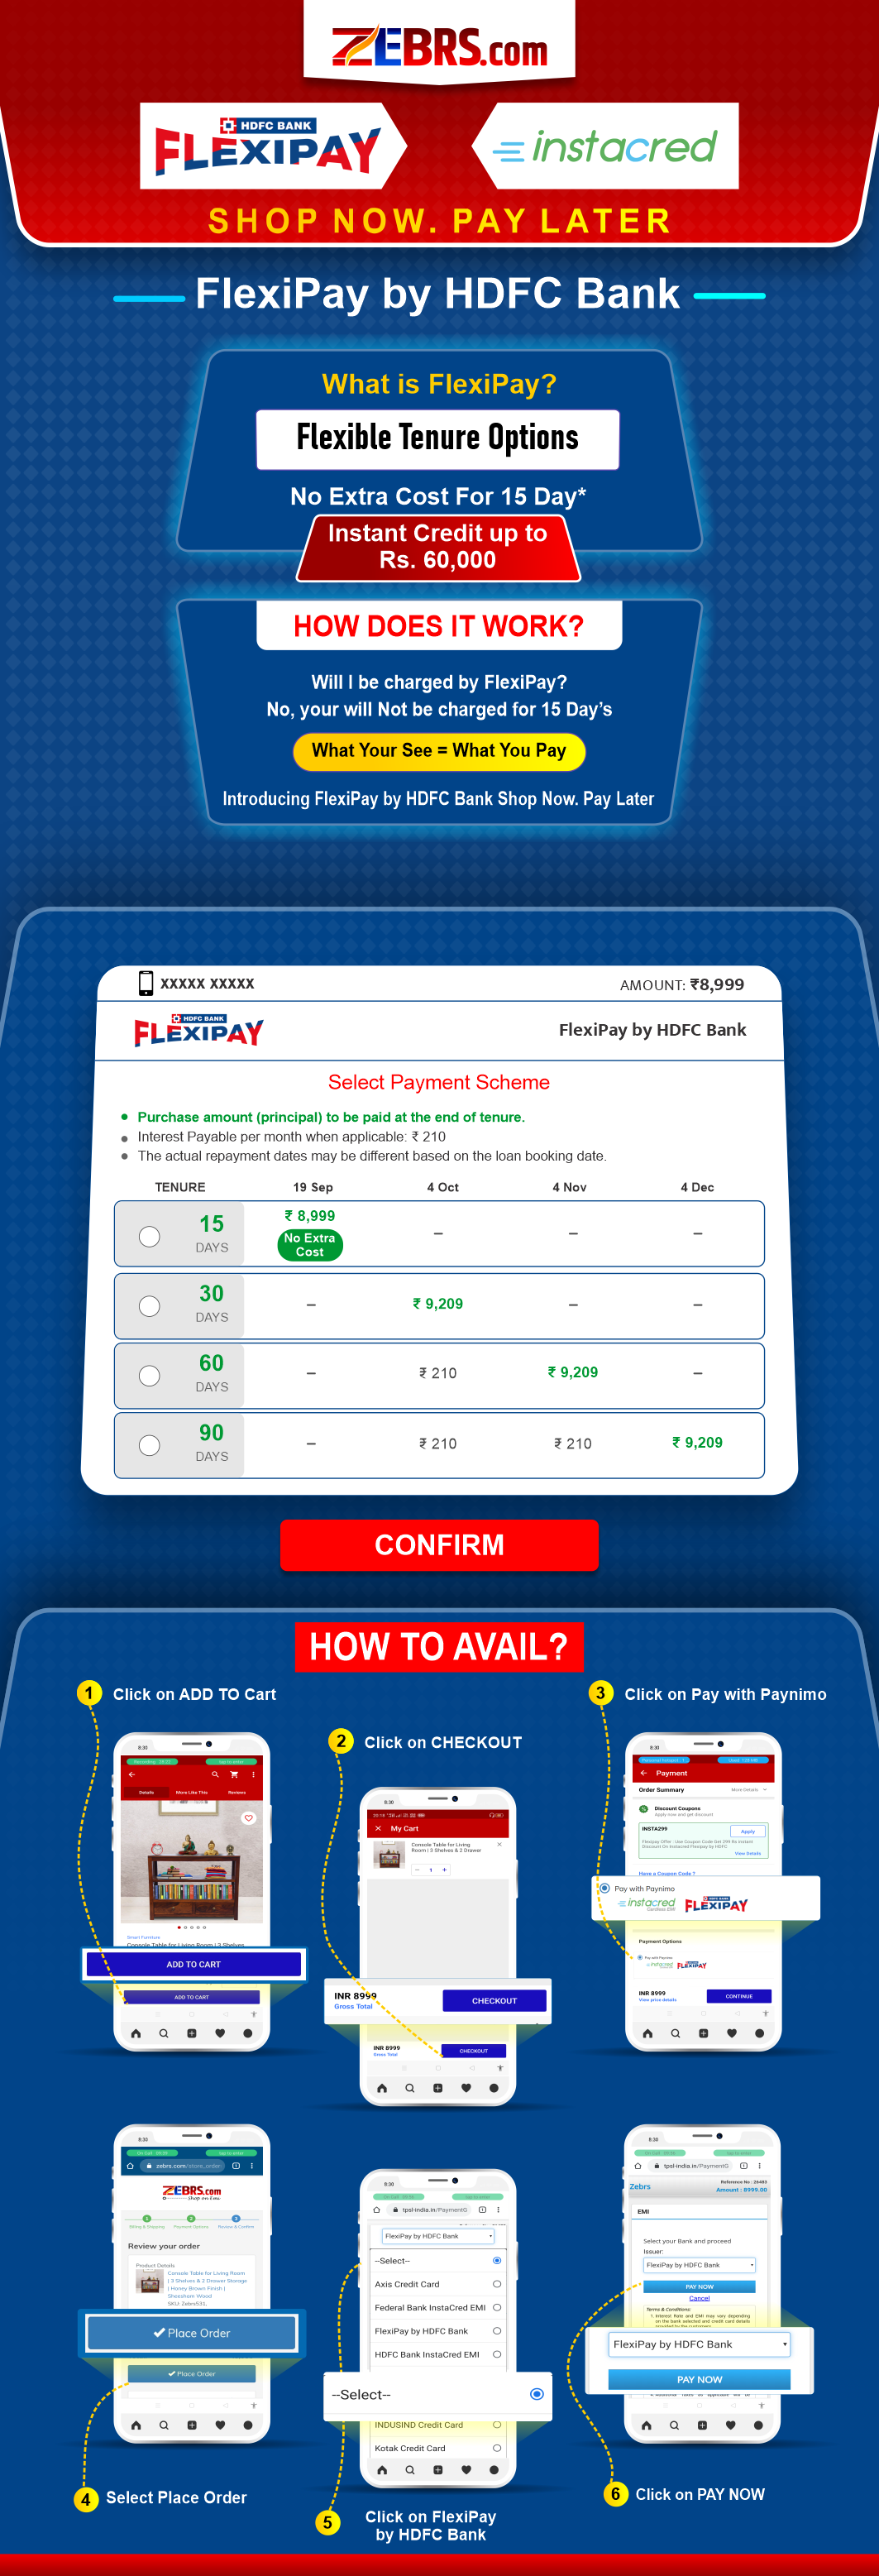 Instacred FlexiPay By HDFC Bank